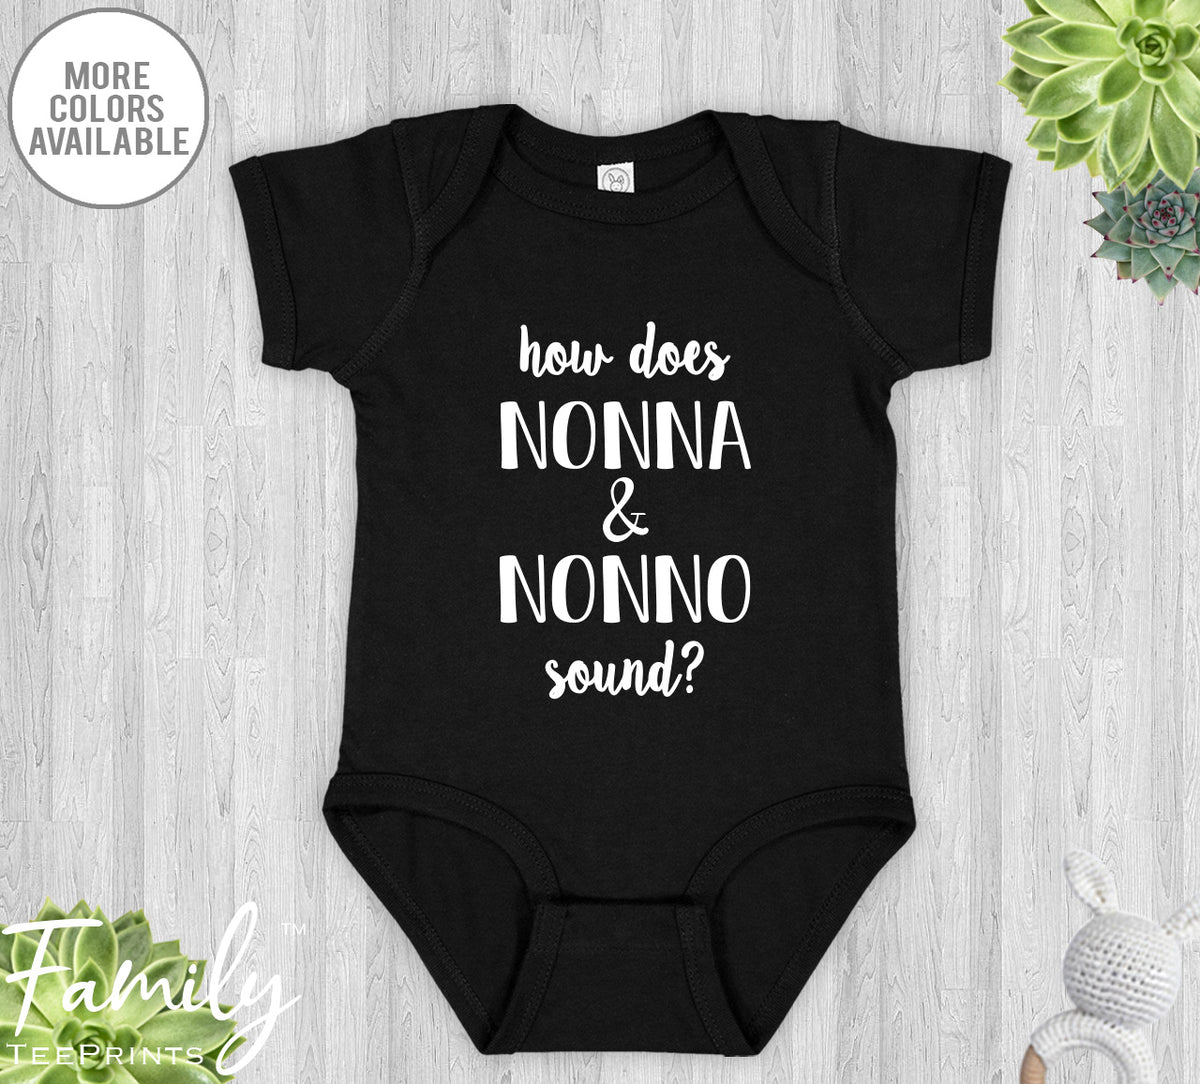 How Does Nonna & Nonno Sound? - Baby Onesie - Pregnancy Reveal Gift - Baby Announcement - familyteeprints